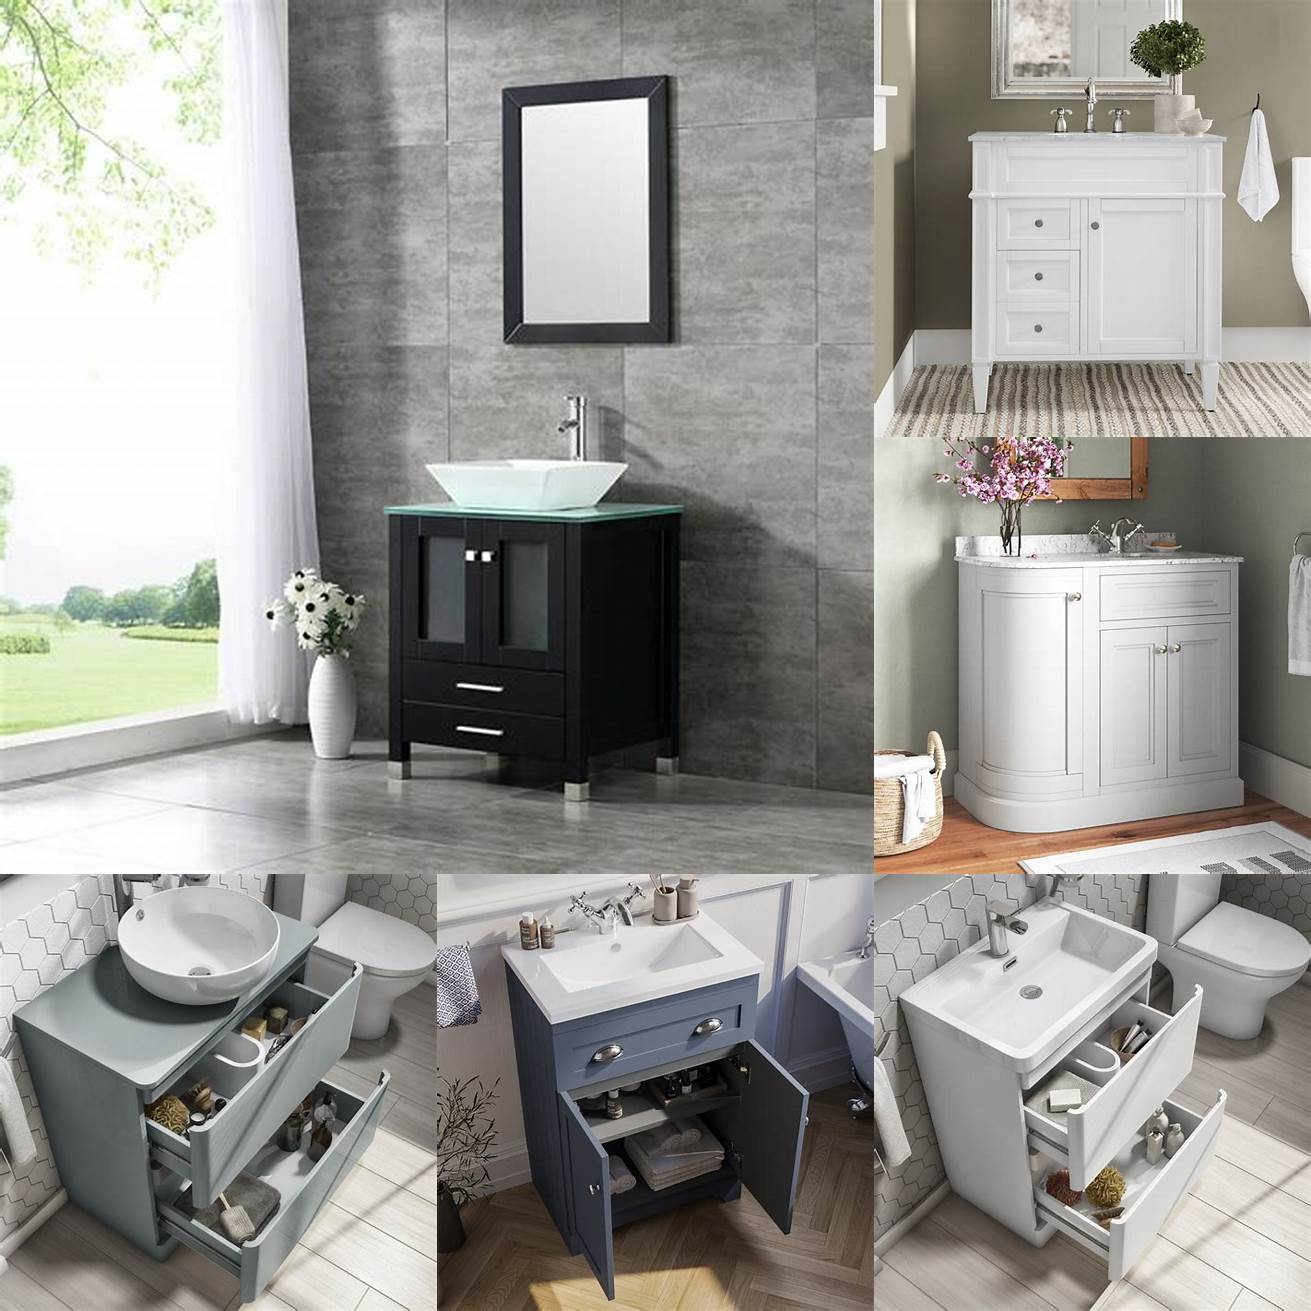 Image A freestanding vanity with drawers and glass countertop